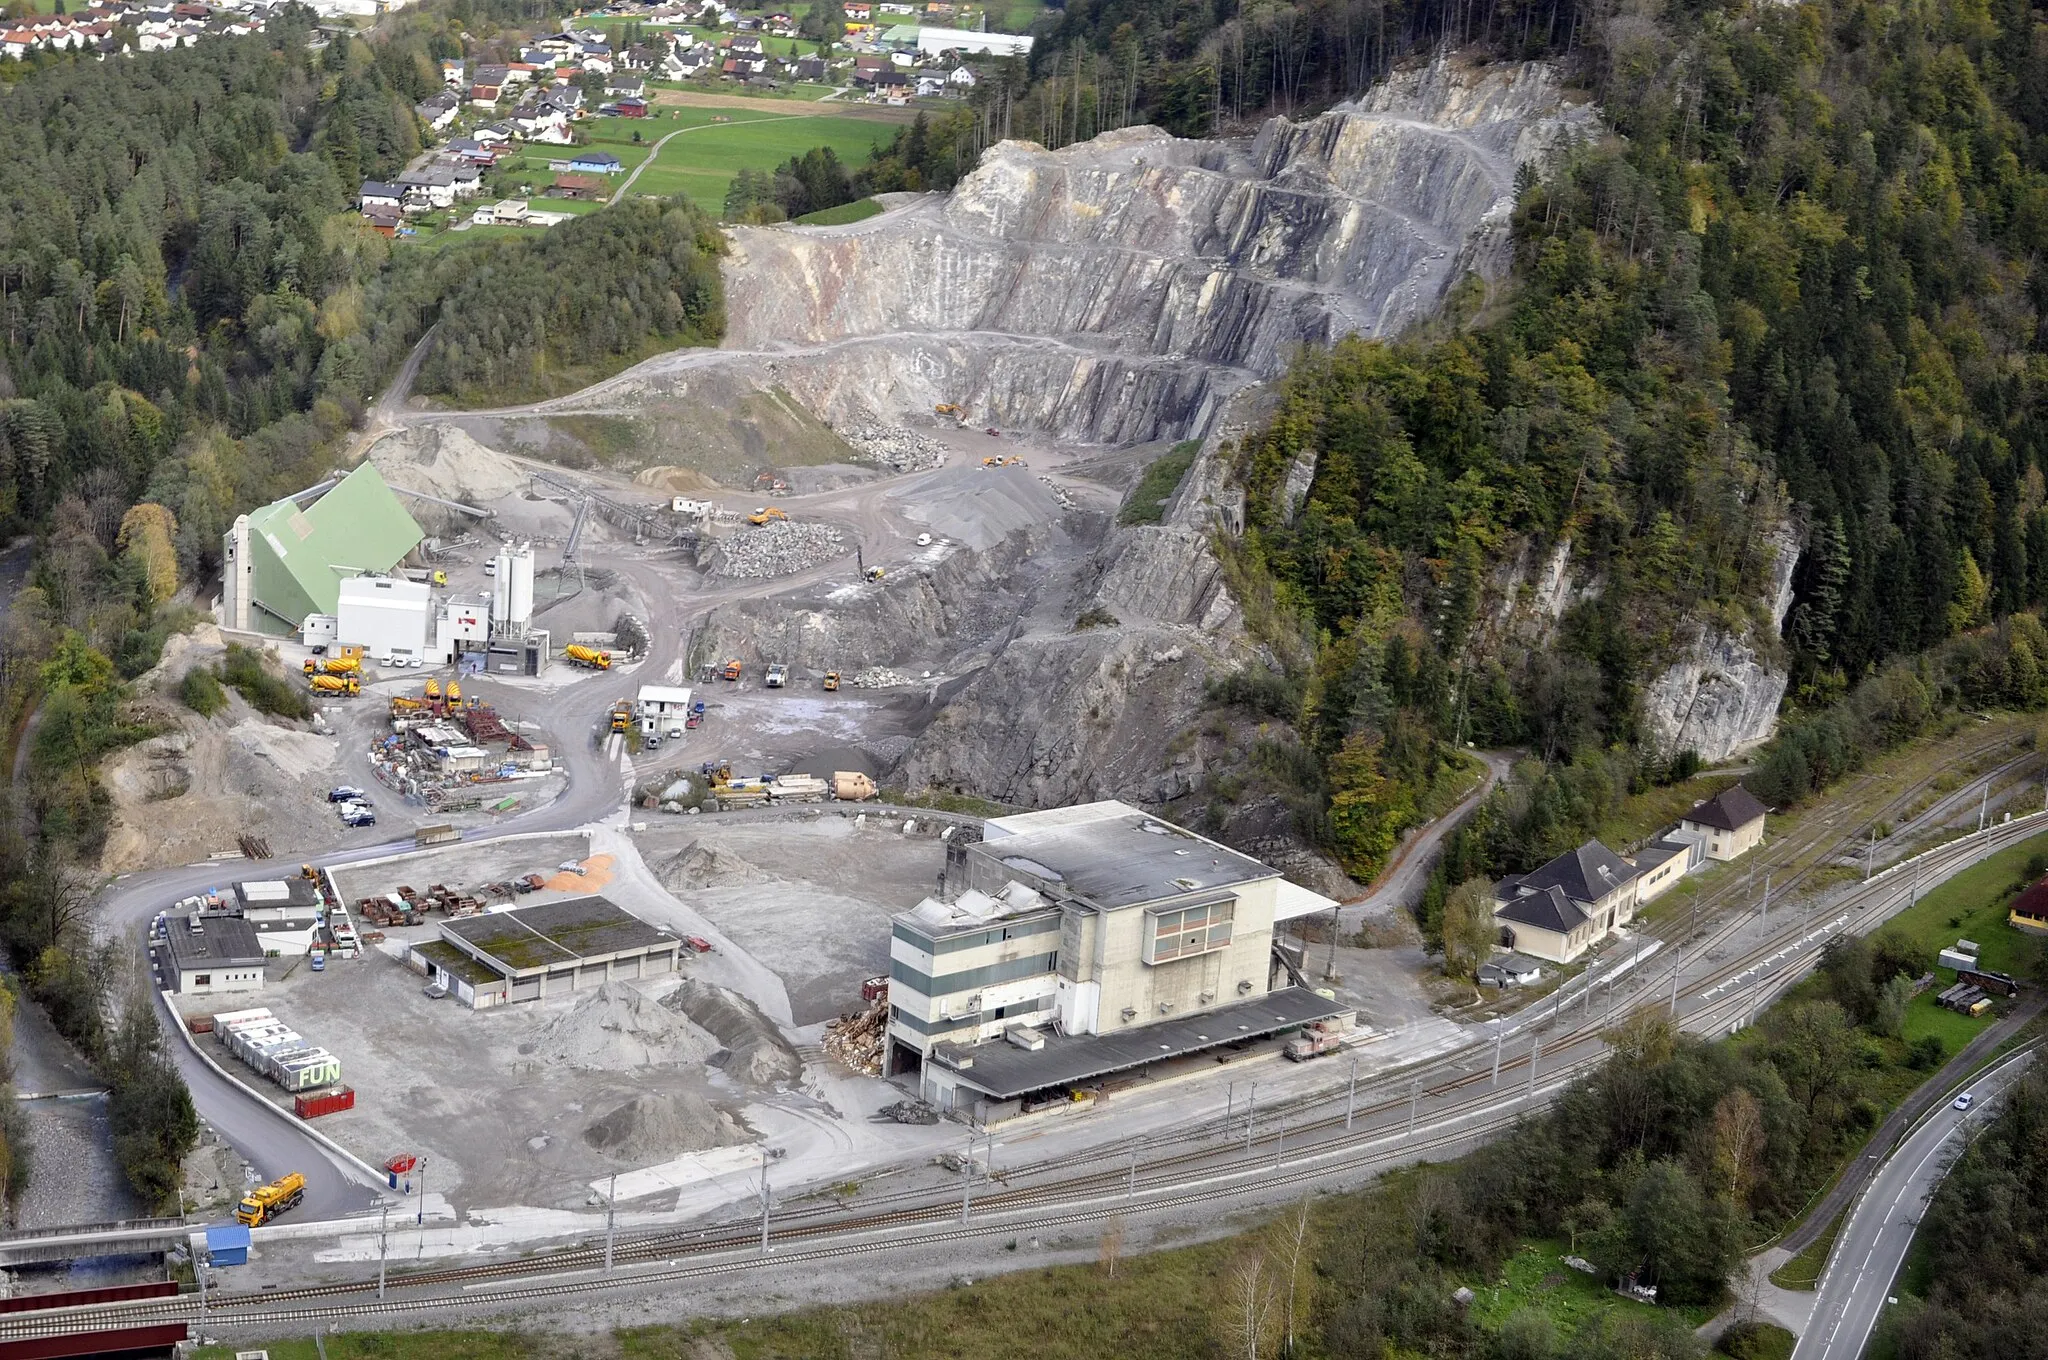 Photo showing: The cement factory "Zementwerke Loruens" were on the border between the communities of Bludenz, Loruens and Stallehr in Vorarlberg, Austria and produced cement and stones.